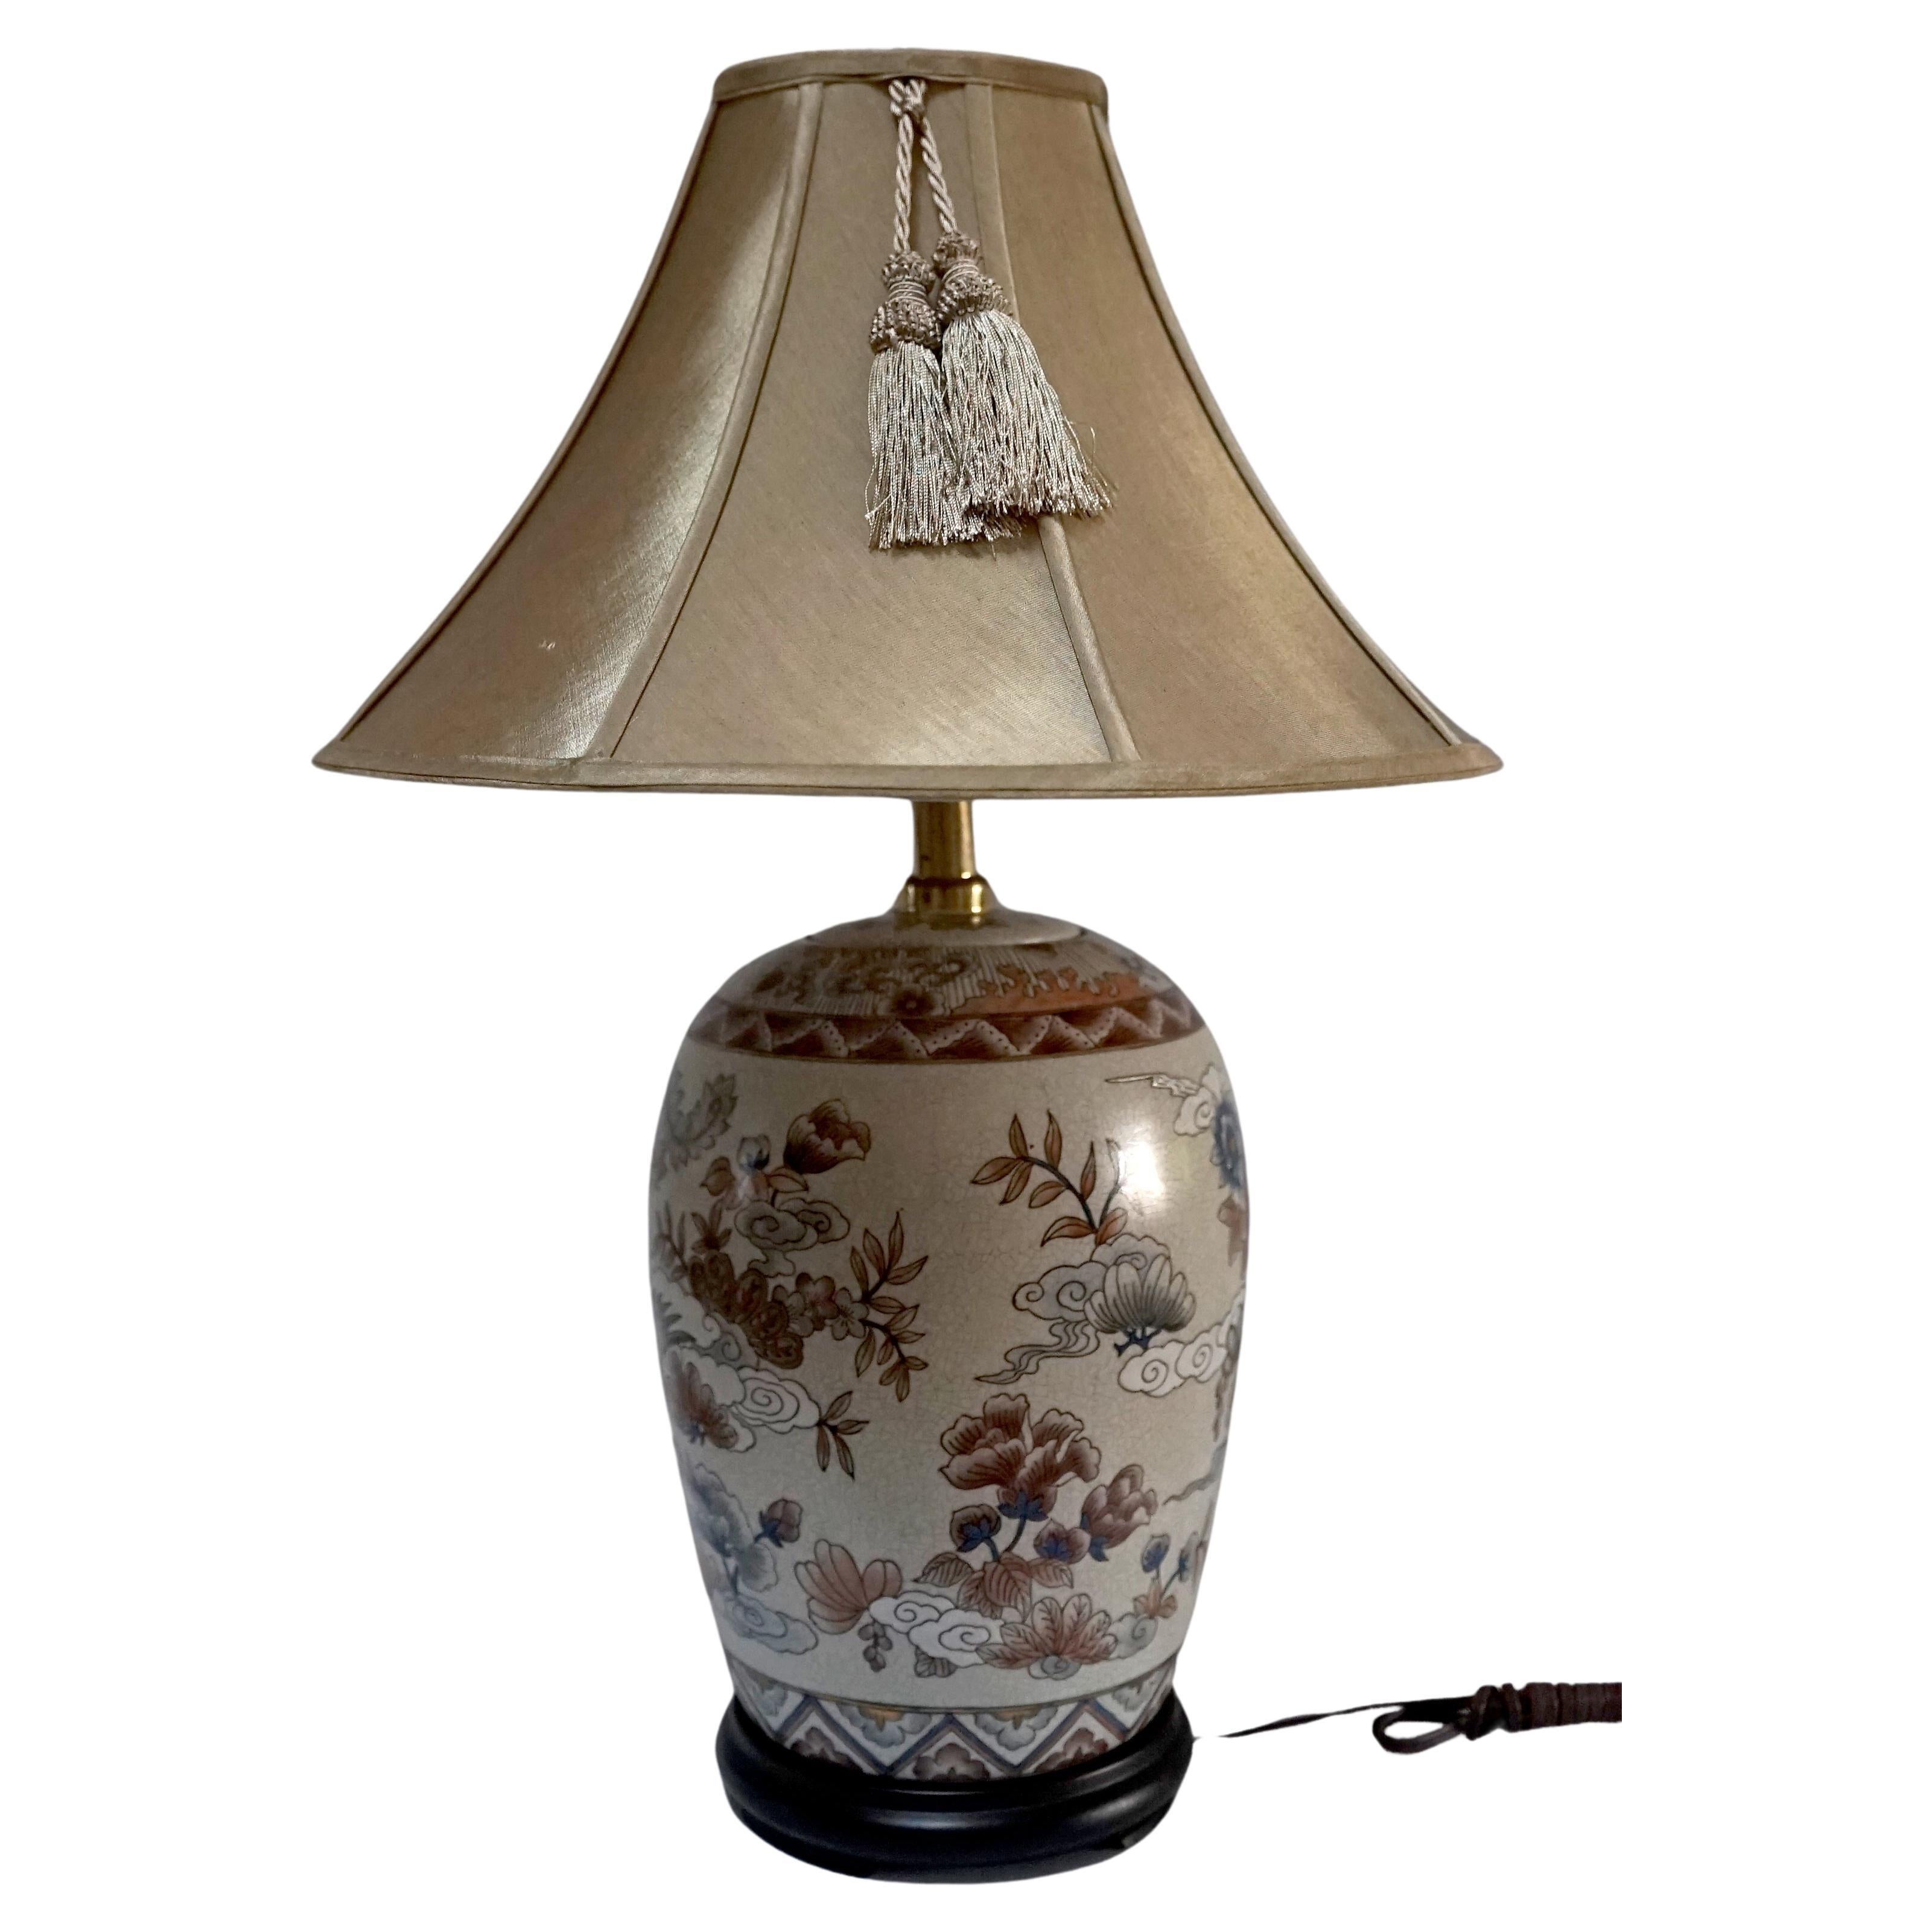 Vintage Japanese Table Lamp with Geometric, Birds, Clouds Motif For Sale